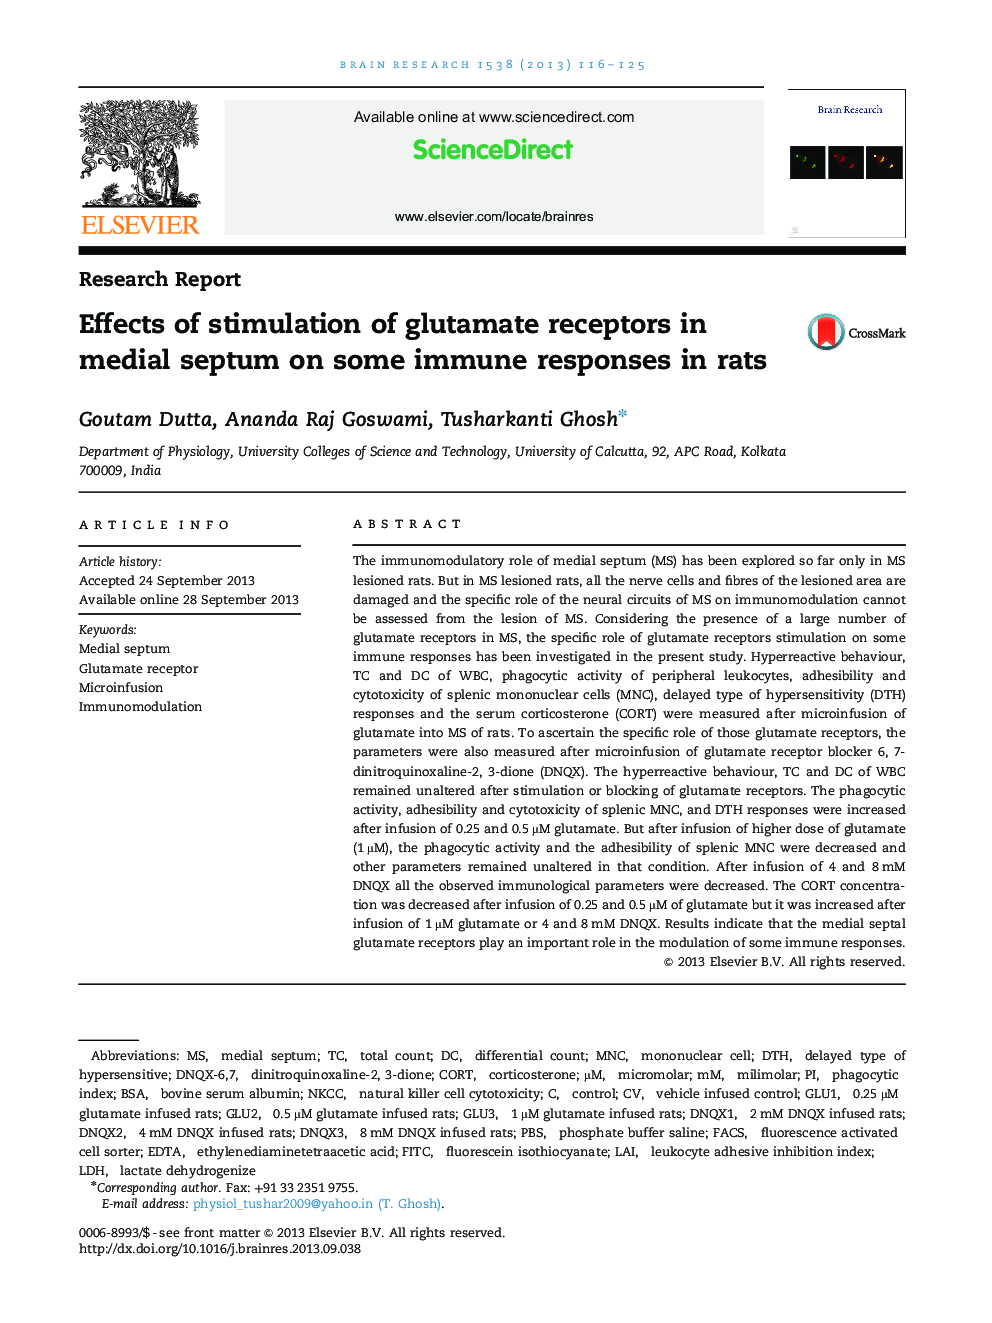 Research ReportEffects of stimulation of glutamate receptors in medial septum on some immune responses in rats